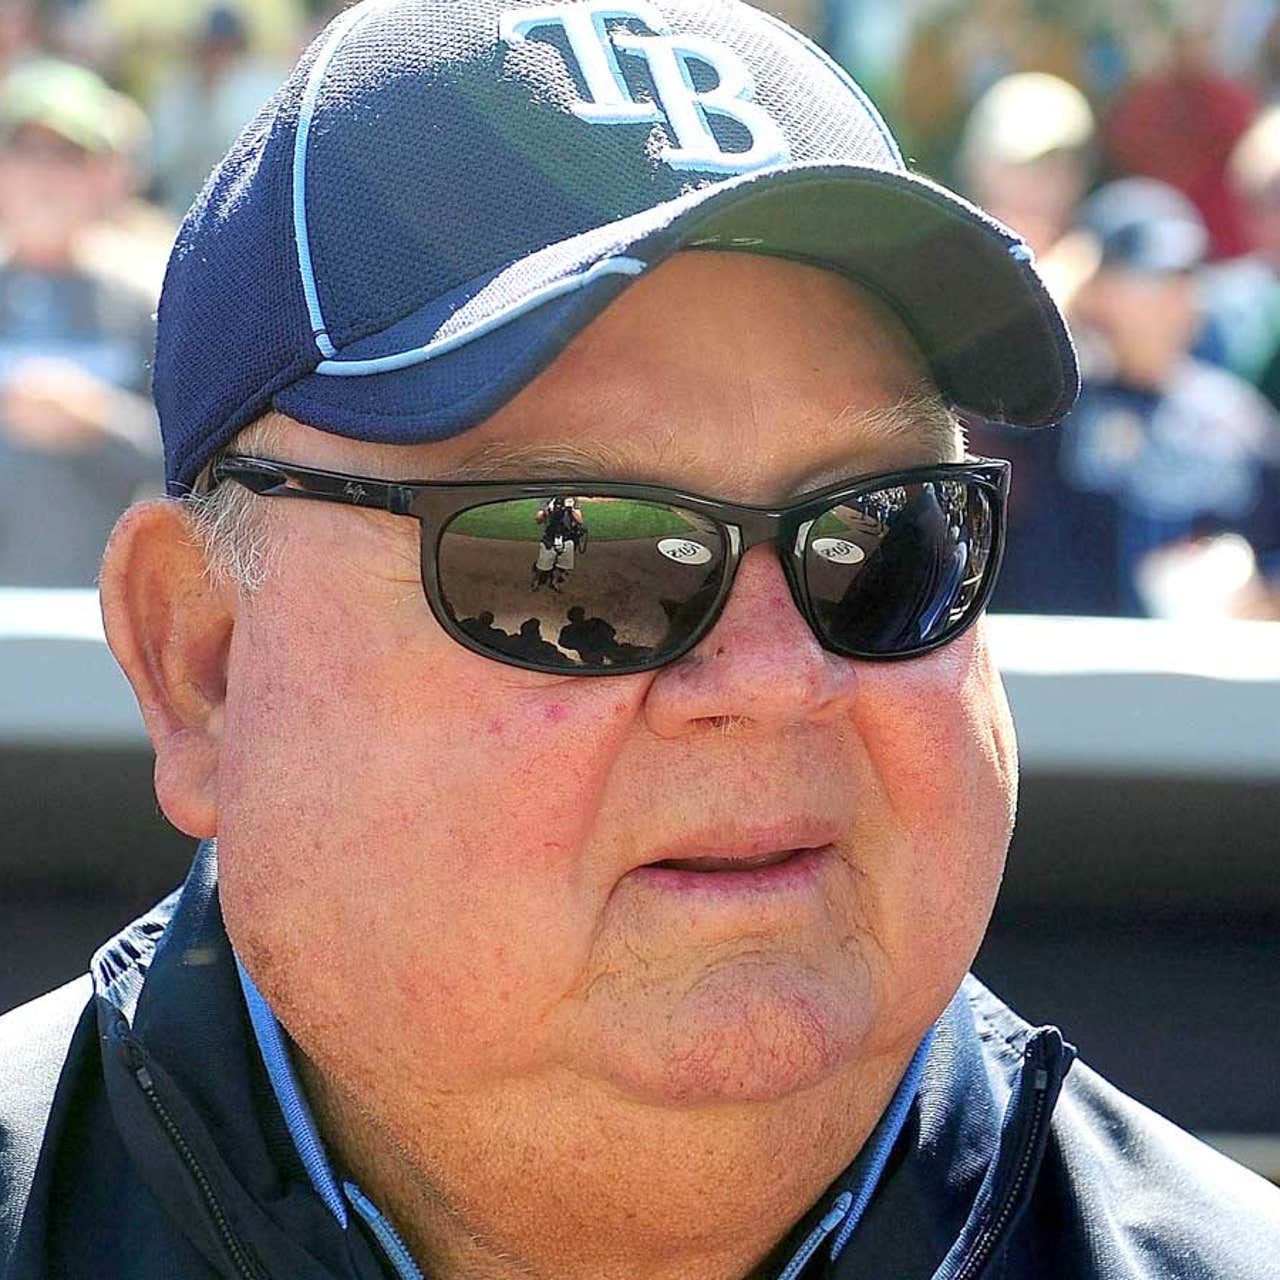 Don Zimmer, iconic coach, manager, dies at 83